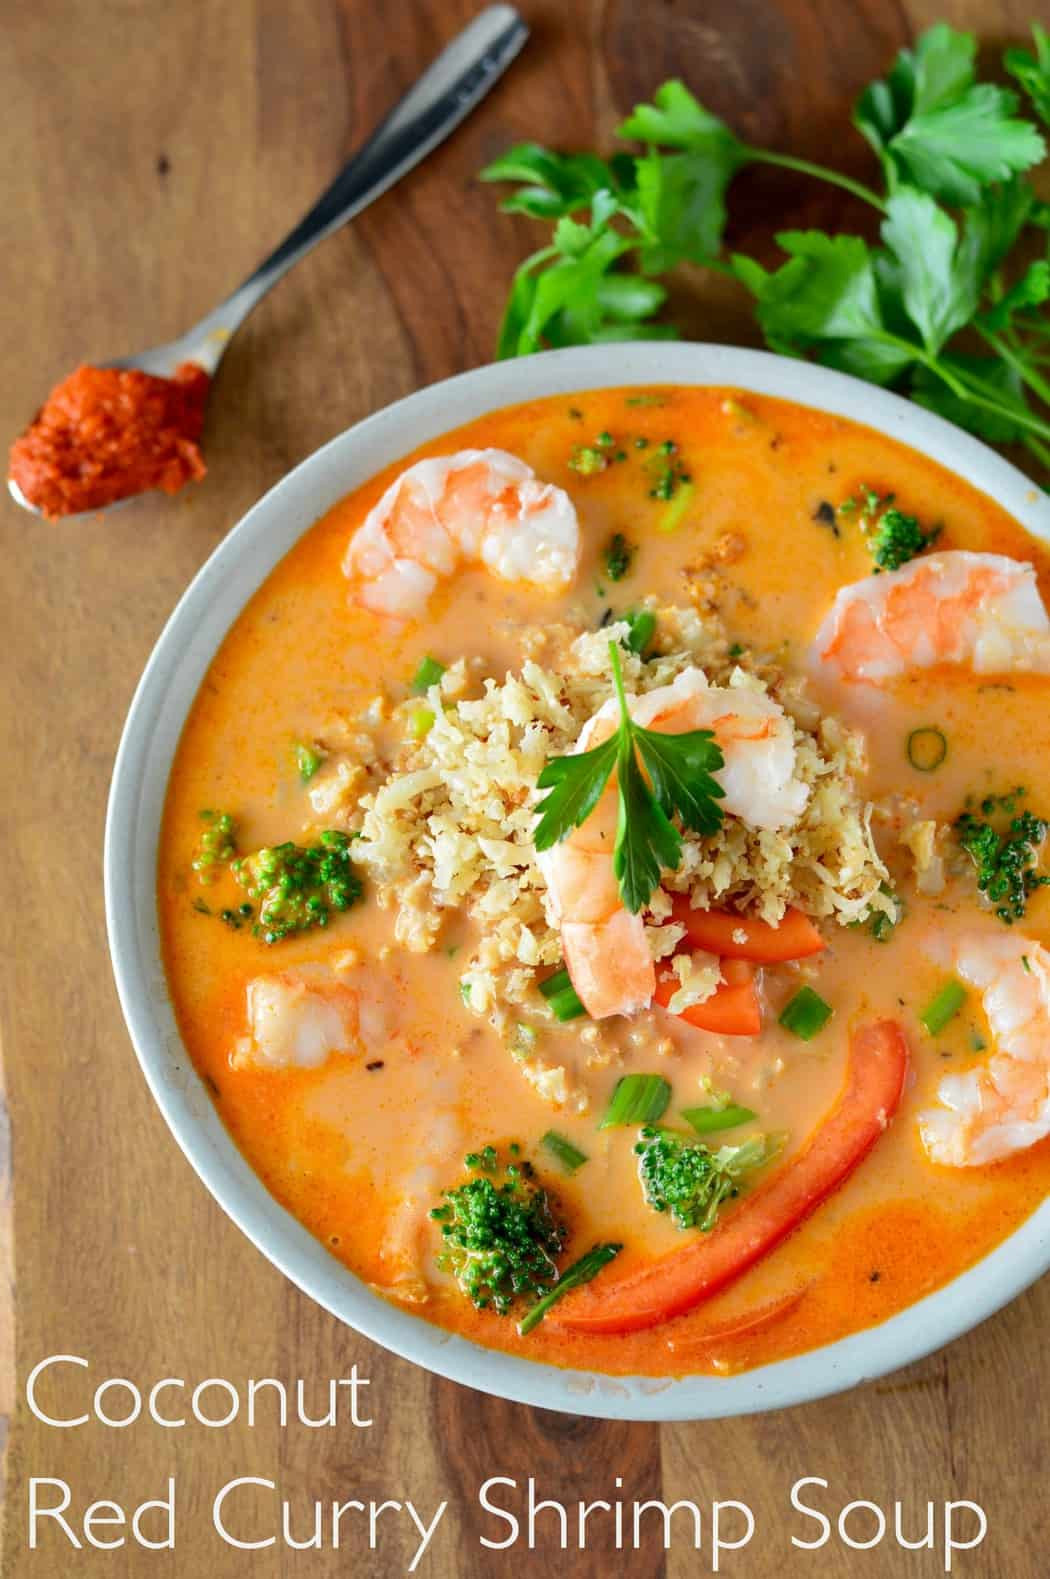 Shrimp Soup Recipes
 Coconut Red Curry Shrimp Soup Guest Blog by Real Food